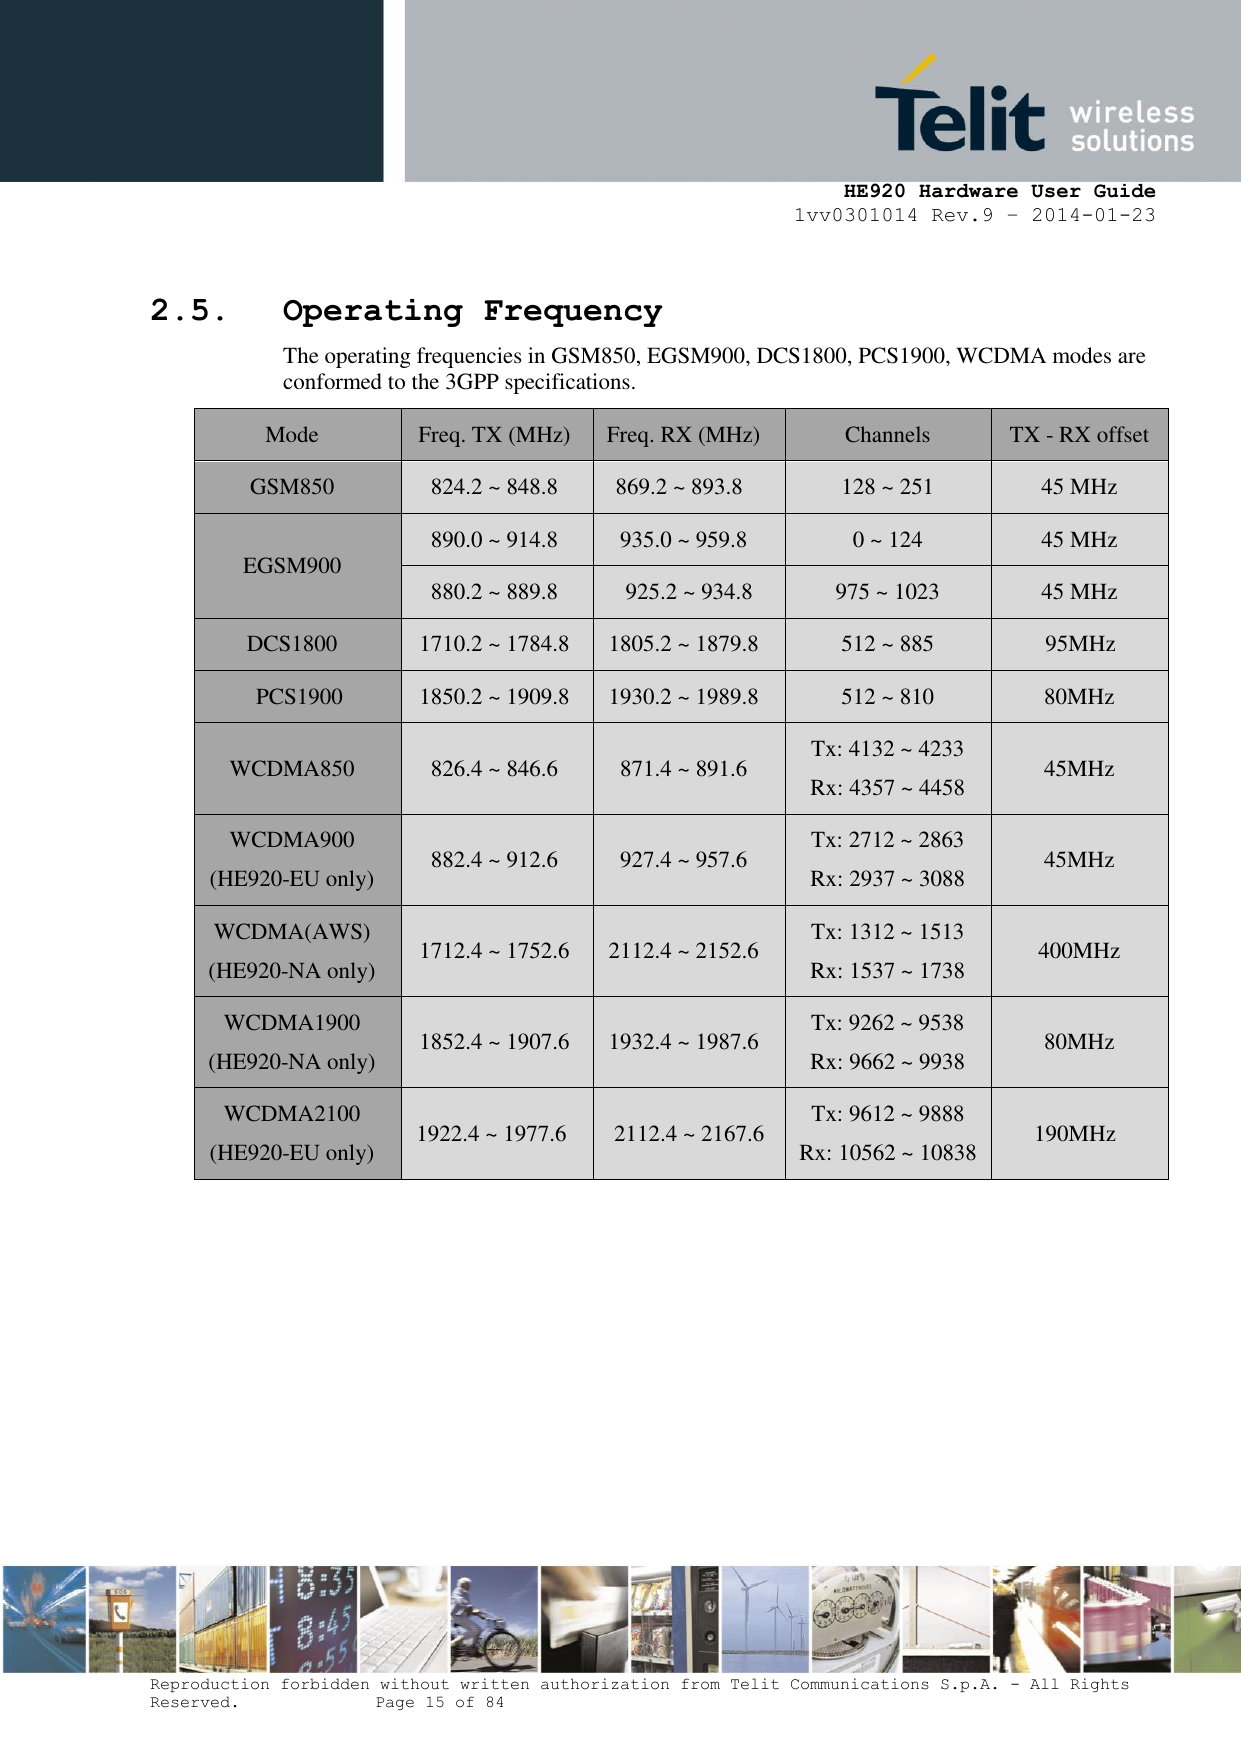     HE920 Hardware User Guide 1vv0301014 Rev.9 – 2014-01-23 Reproduction forbidden without written authorization from Telit Communications S.p.A. - All Rights Reserved.    Page 15 of 84  2.5. Operating Frequency The operating frequencies in GSM850, EGSM900, DCS1800, PCS1900, WCDMA modes are conformed to the 3GPP specifications. Mode Freq. TX (MHz) Freq. RX (MHz) Channels TX - RX offset GSM850 824.2 ~ 848.8  869.2 ~ 893.8 128 ~ 251 45 MHz EGSM900 890.0 ~ 914.8 935.0 ~ 959.8 0 ~ 124 45 MHz 880.2 ~ 889.8 925.2 ~ 934.8 975 ~ 1023 45 MHz DCS1800 1710.2 ~ 1784.8 1805.2 ~ 1879.8 512 ~ 885 95MHz PCS1900 1850.2 ~ 1909.8 1930.2 ~ 1989.8 512 ~ 810 80MHz WCDMA850 826.4 ~ 846.6 871.4 ~ 891.6 Tx: 4132 ~ 4233 Rx: 4357 ~ 4458 45MHz WCDMA900 (HE920-EU only) 882.4 ~ 912.6 927.4 ~ 957.6 Tx: 2712 ~ 2863 Rx: 2937 ~ 3088 45MHz WCDMA(AWS) (HE920-NA only) 1712.4 ~ 1752.6 2112.4 ~ 2152.6 Tx: 1312 ~ 1513 Rx: 1537 ~ 1738 400MHz WCDMA1900 (HE920-NA only) 1852.4 ~ 1907.6 1932.4 ~ 1987.6 Tx: 9262 ~ 9538 Rx: 9662 ~ 9938 80MHz WCDMA2100 (HE920-EU only) 1922.4 ~ 1977.6 2112.4 ~ 2167.6 Tx: 9612 ~ 9888 Rx: 10562 ~ 10838 190MHz  